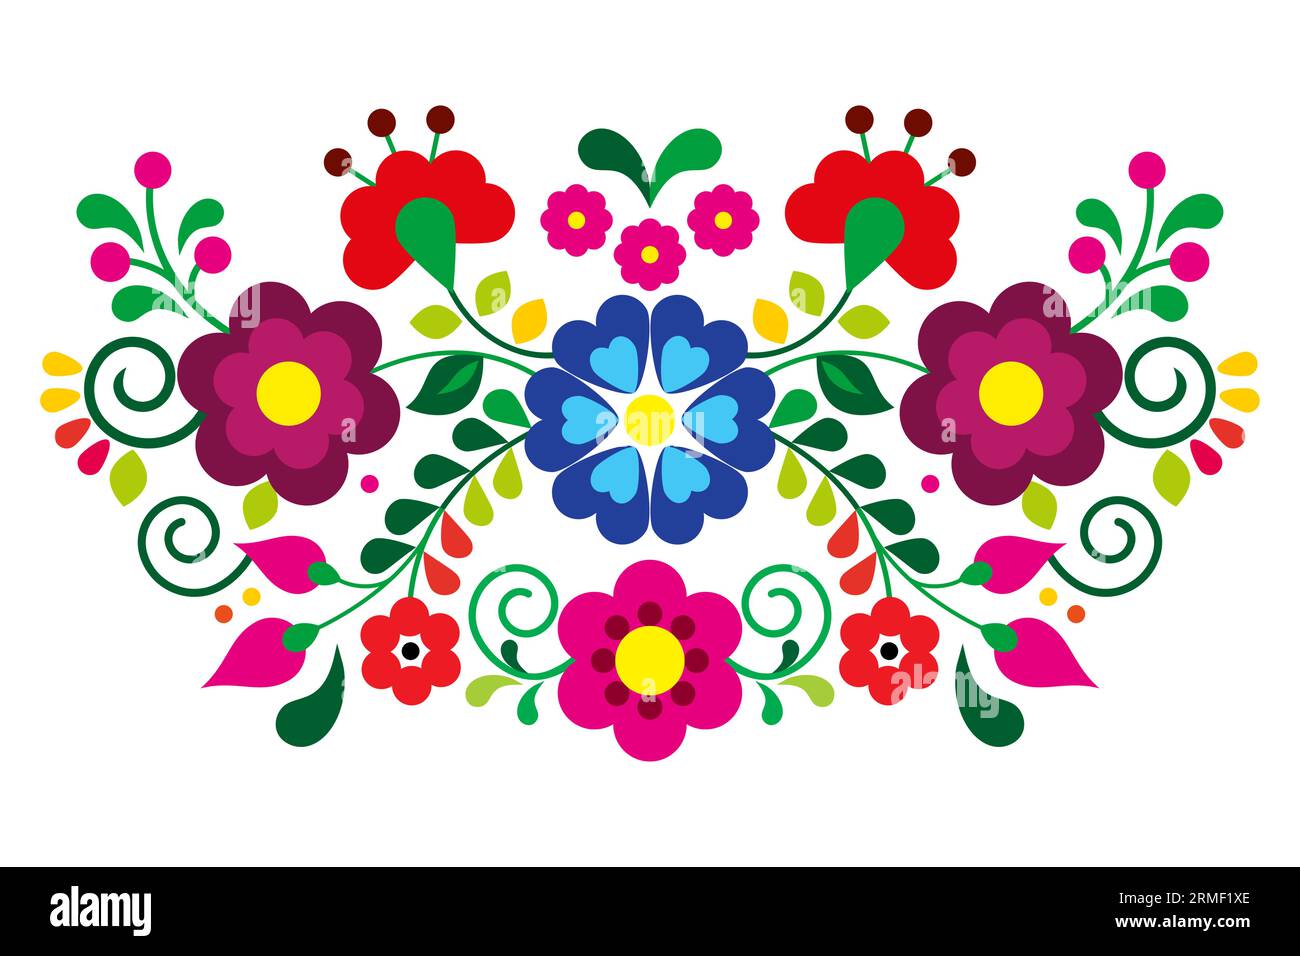 Mexican folk art style vector floral pattern,  retro design inspired by traditional embroidery from Mexico Stock Vector